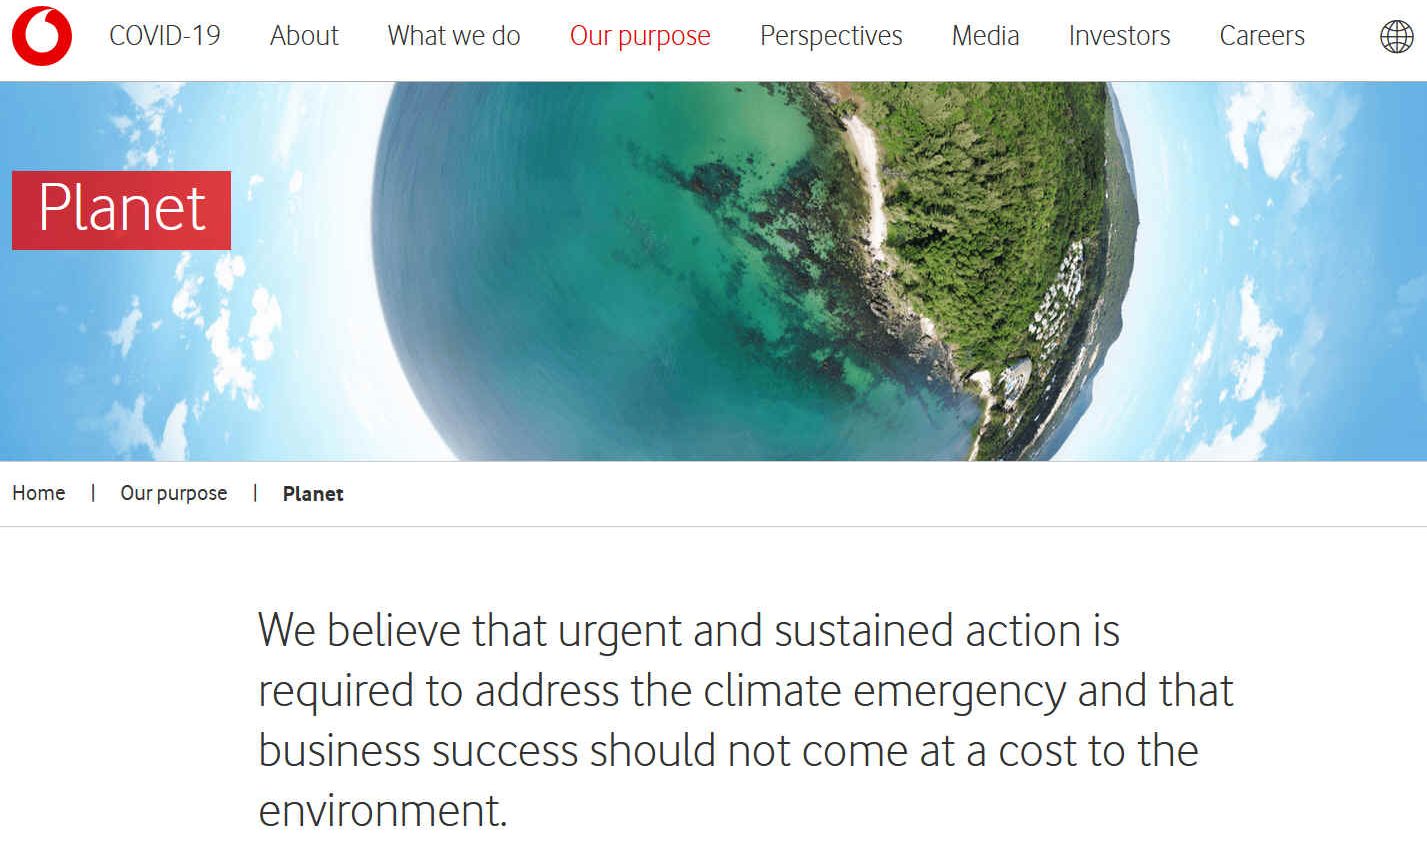 Vodafone believes sustained action is required to address the climate emergency